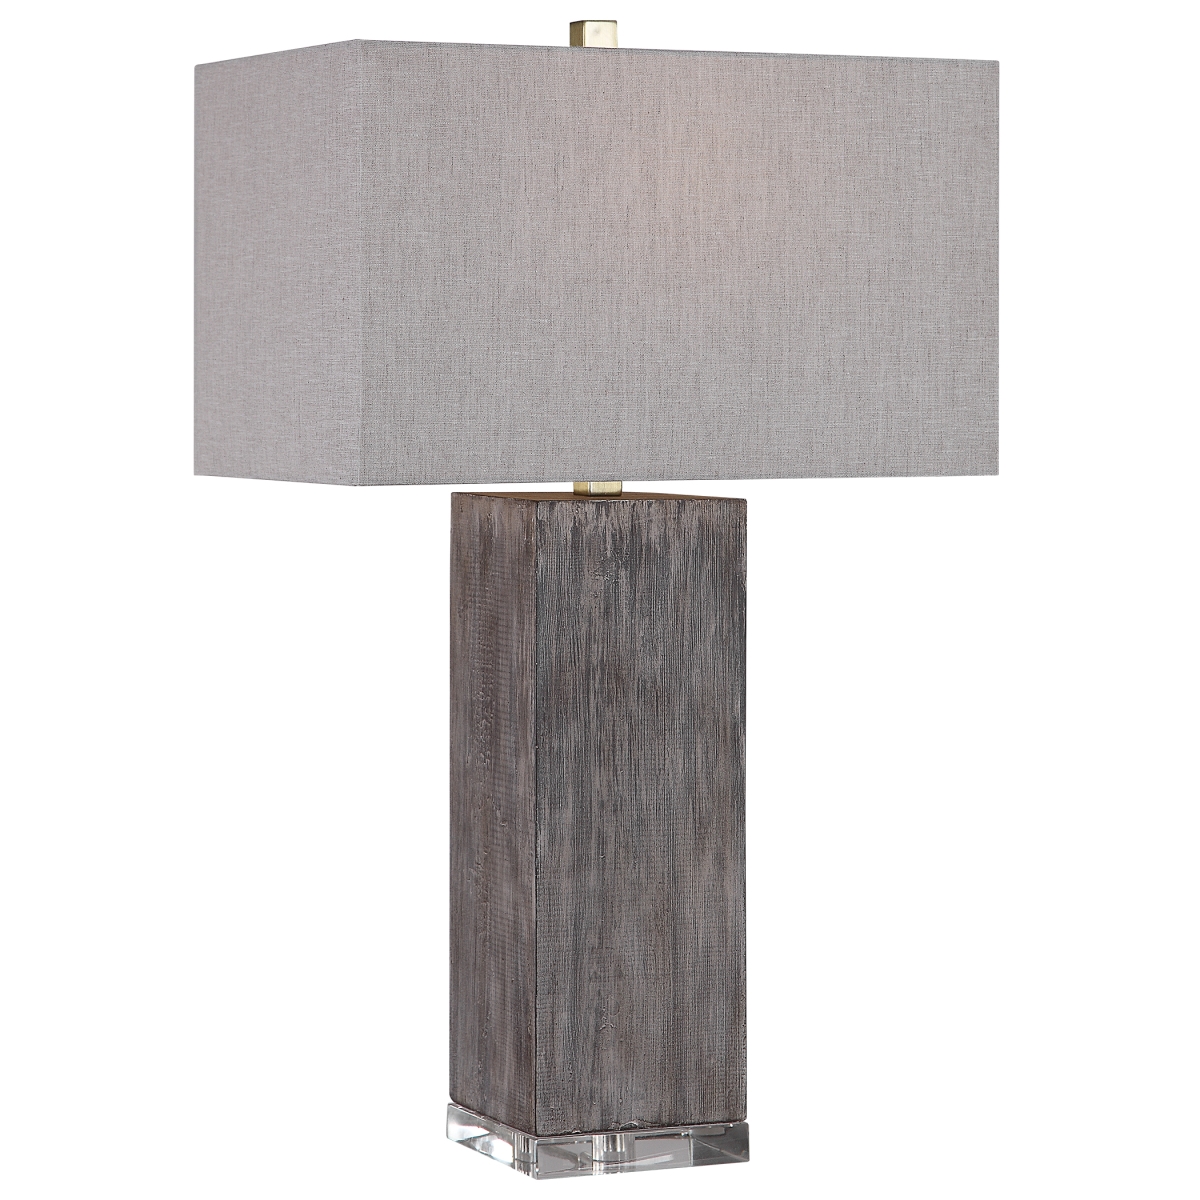 Picture of 212 Main 26227 Vilano Modern Table Lamp